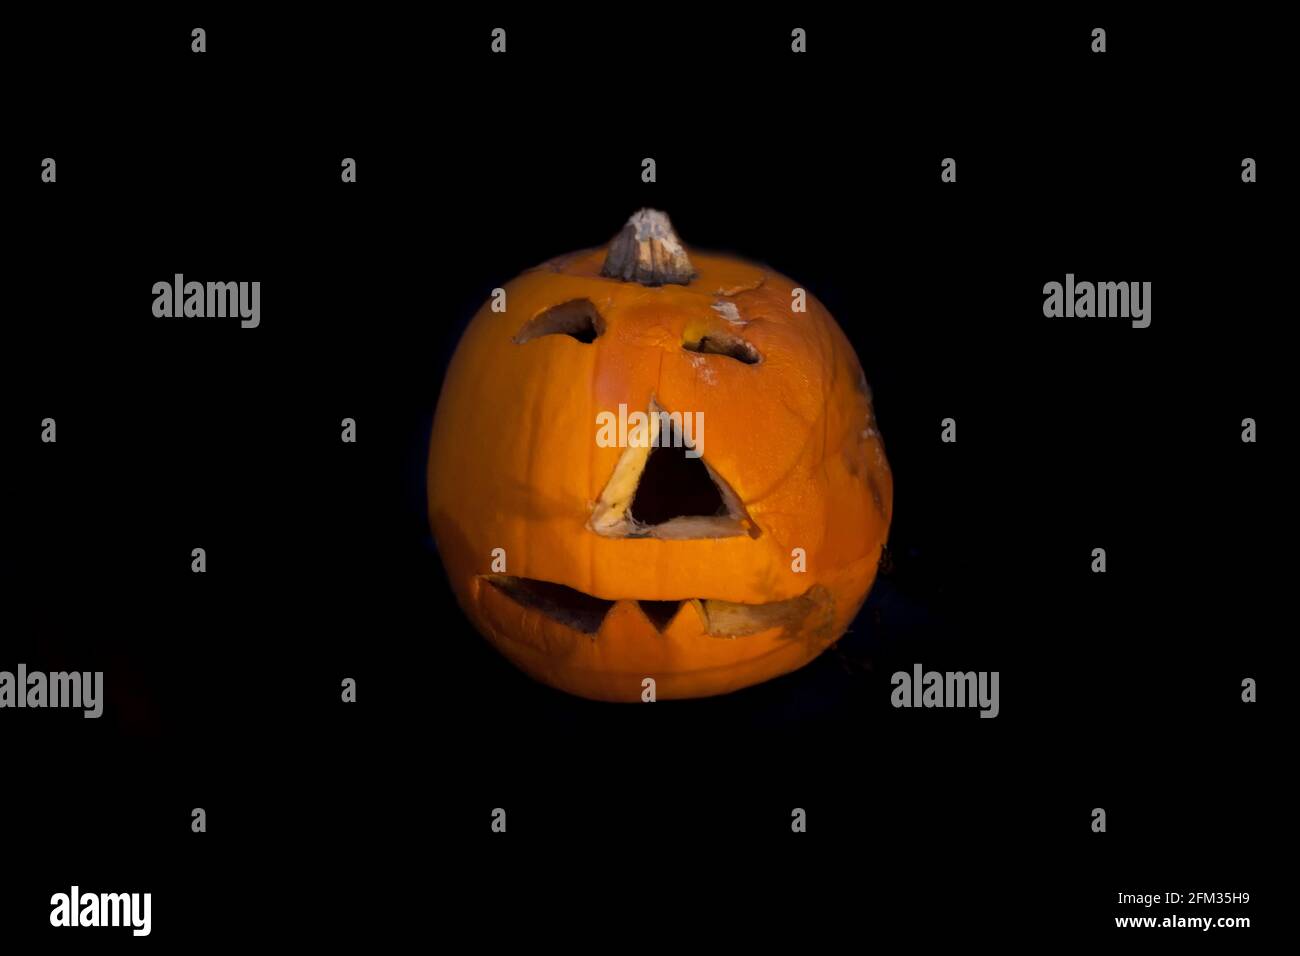 A decaying jack-o-lantern pumpkin with carved face caving in and rotting, on a black background Stock Photo